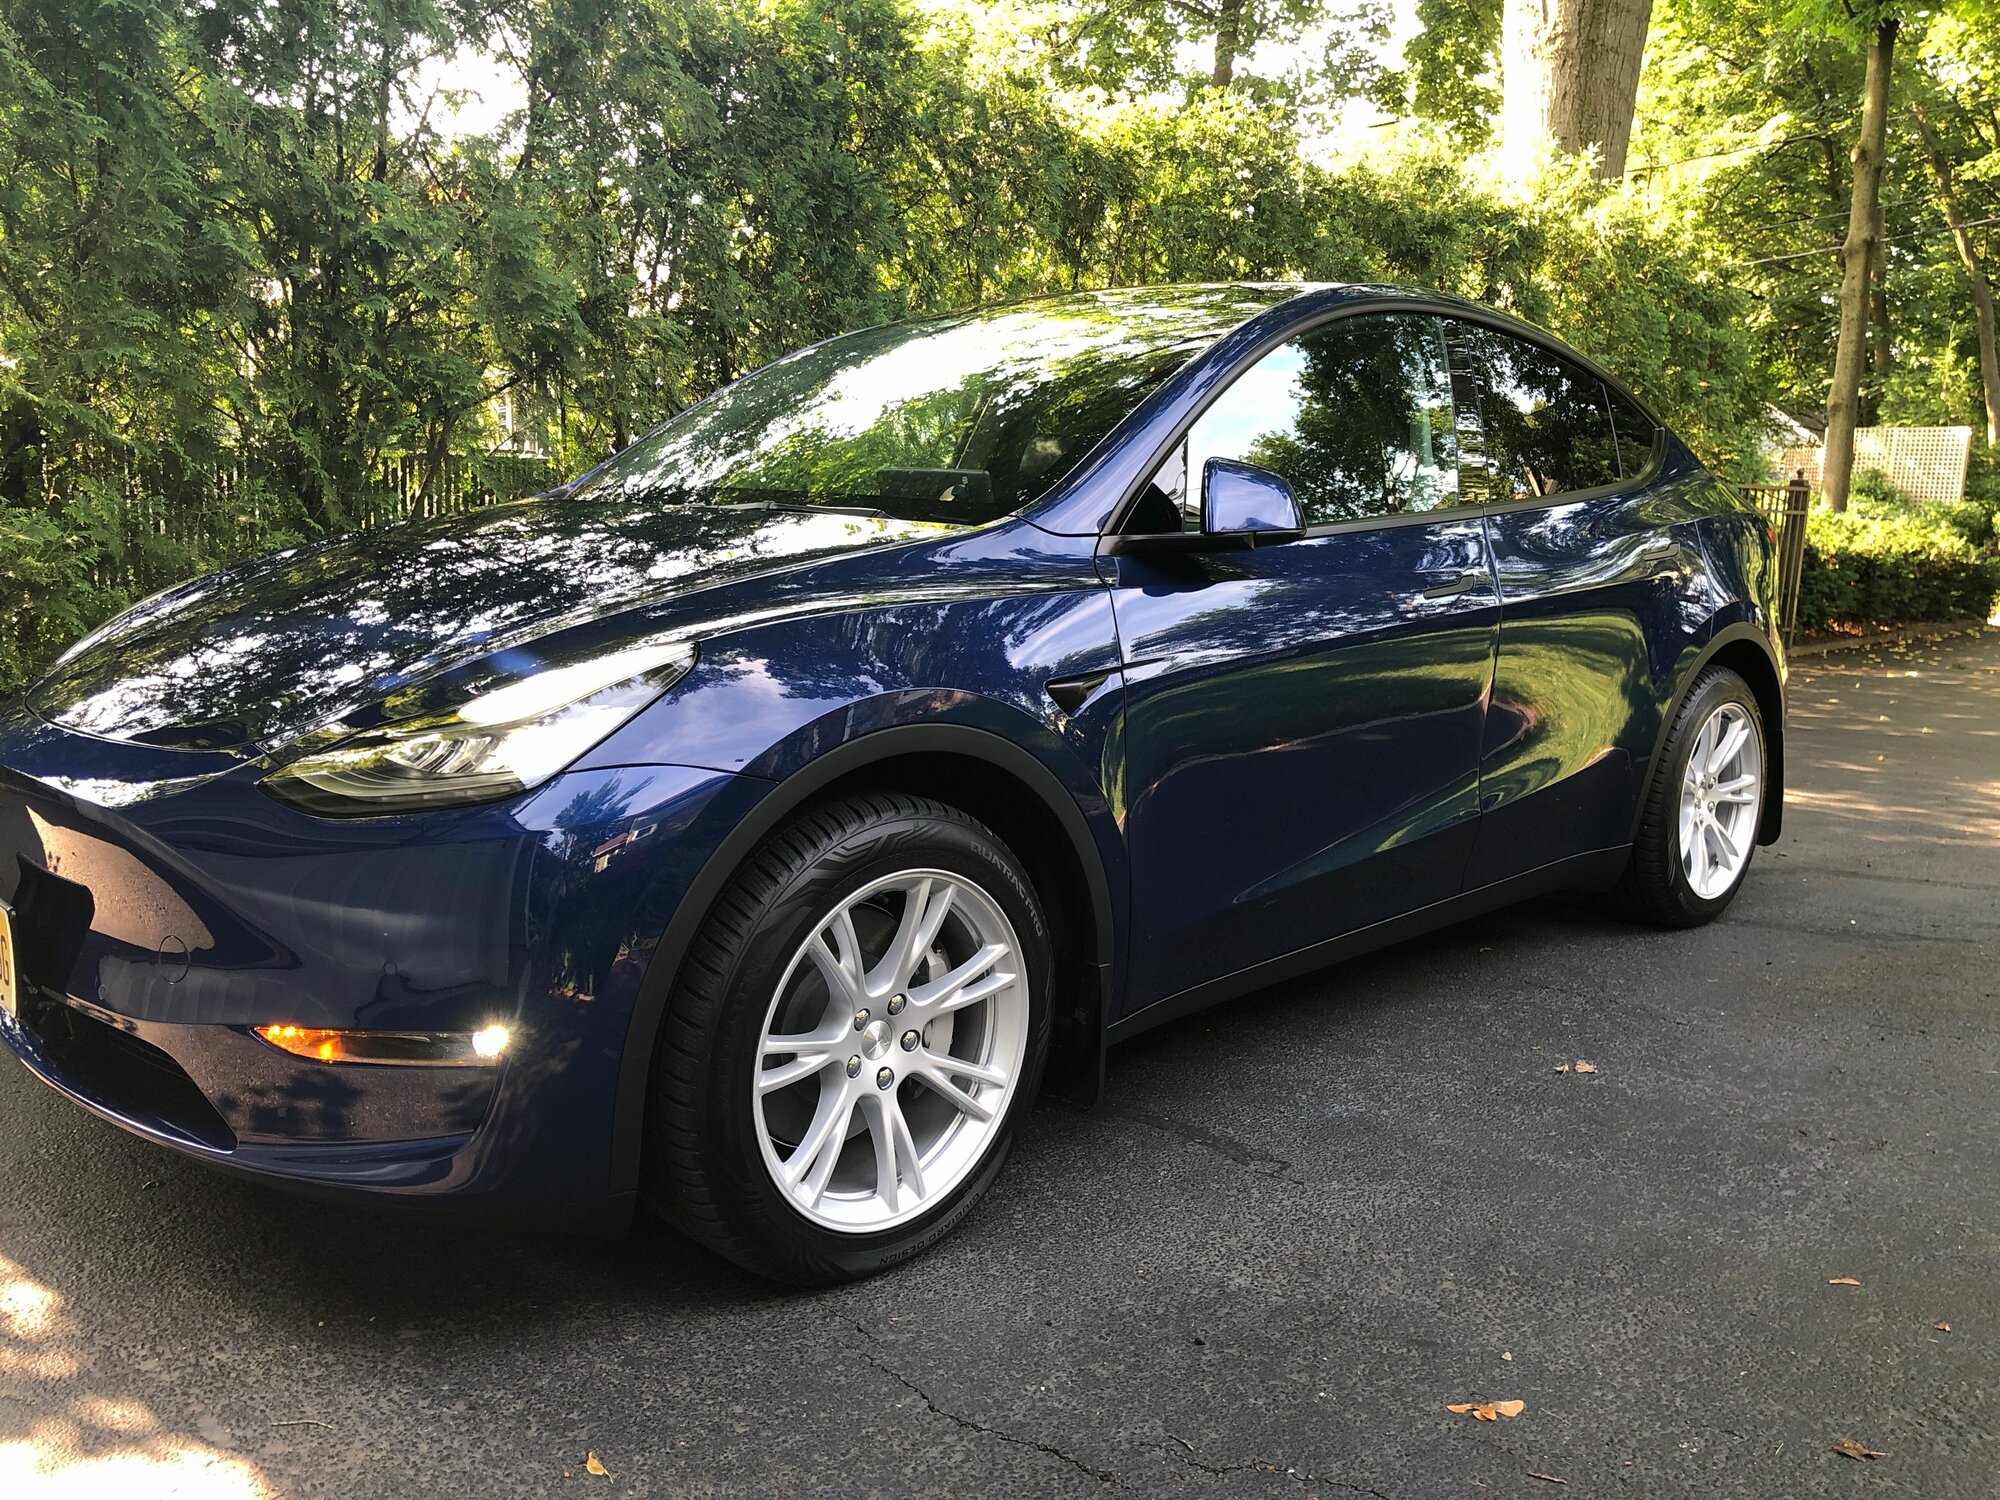 Picture of your Model Y - Right Now!, Page 27